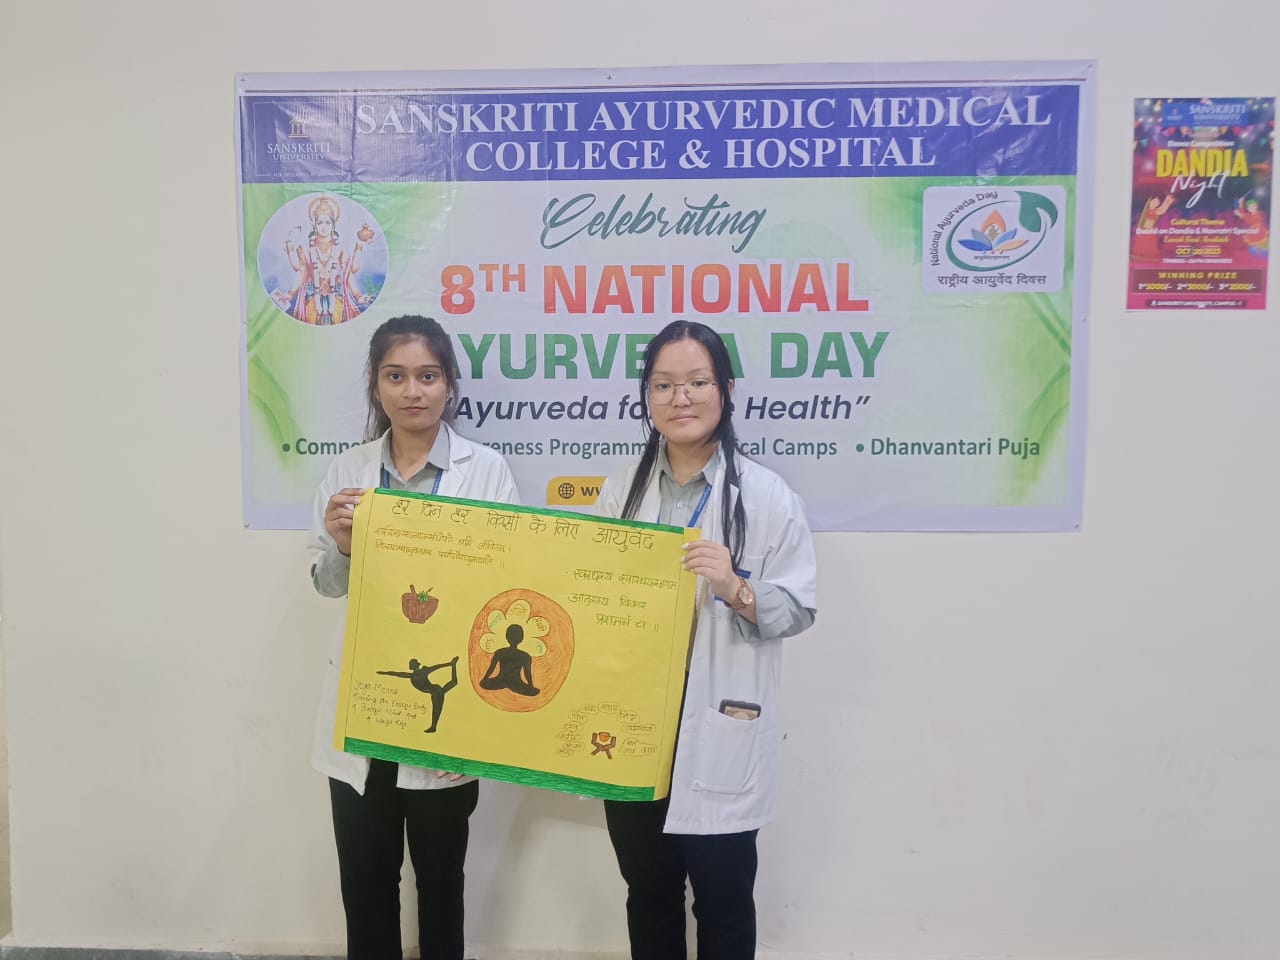 Poster Competition was organised on 6.11.23 among all students of BAMS. 20 groups participated and presented posters on the theme AYURVEDA FOR ONE HEALTH